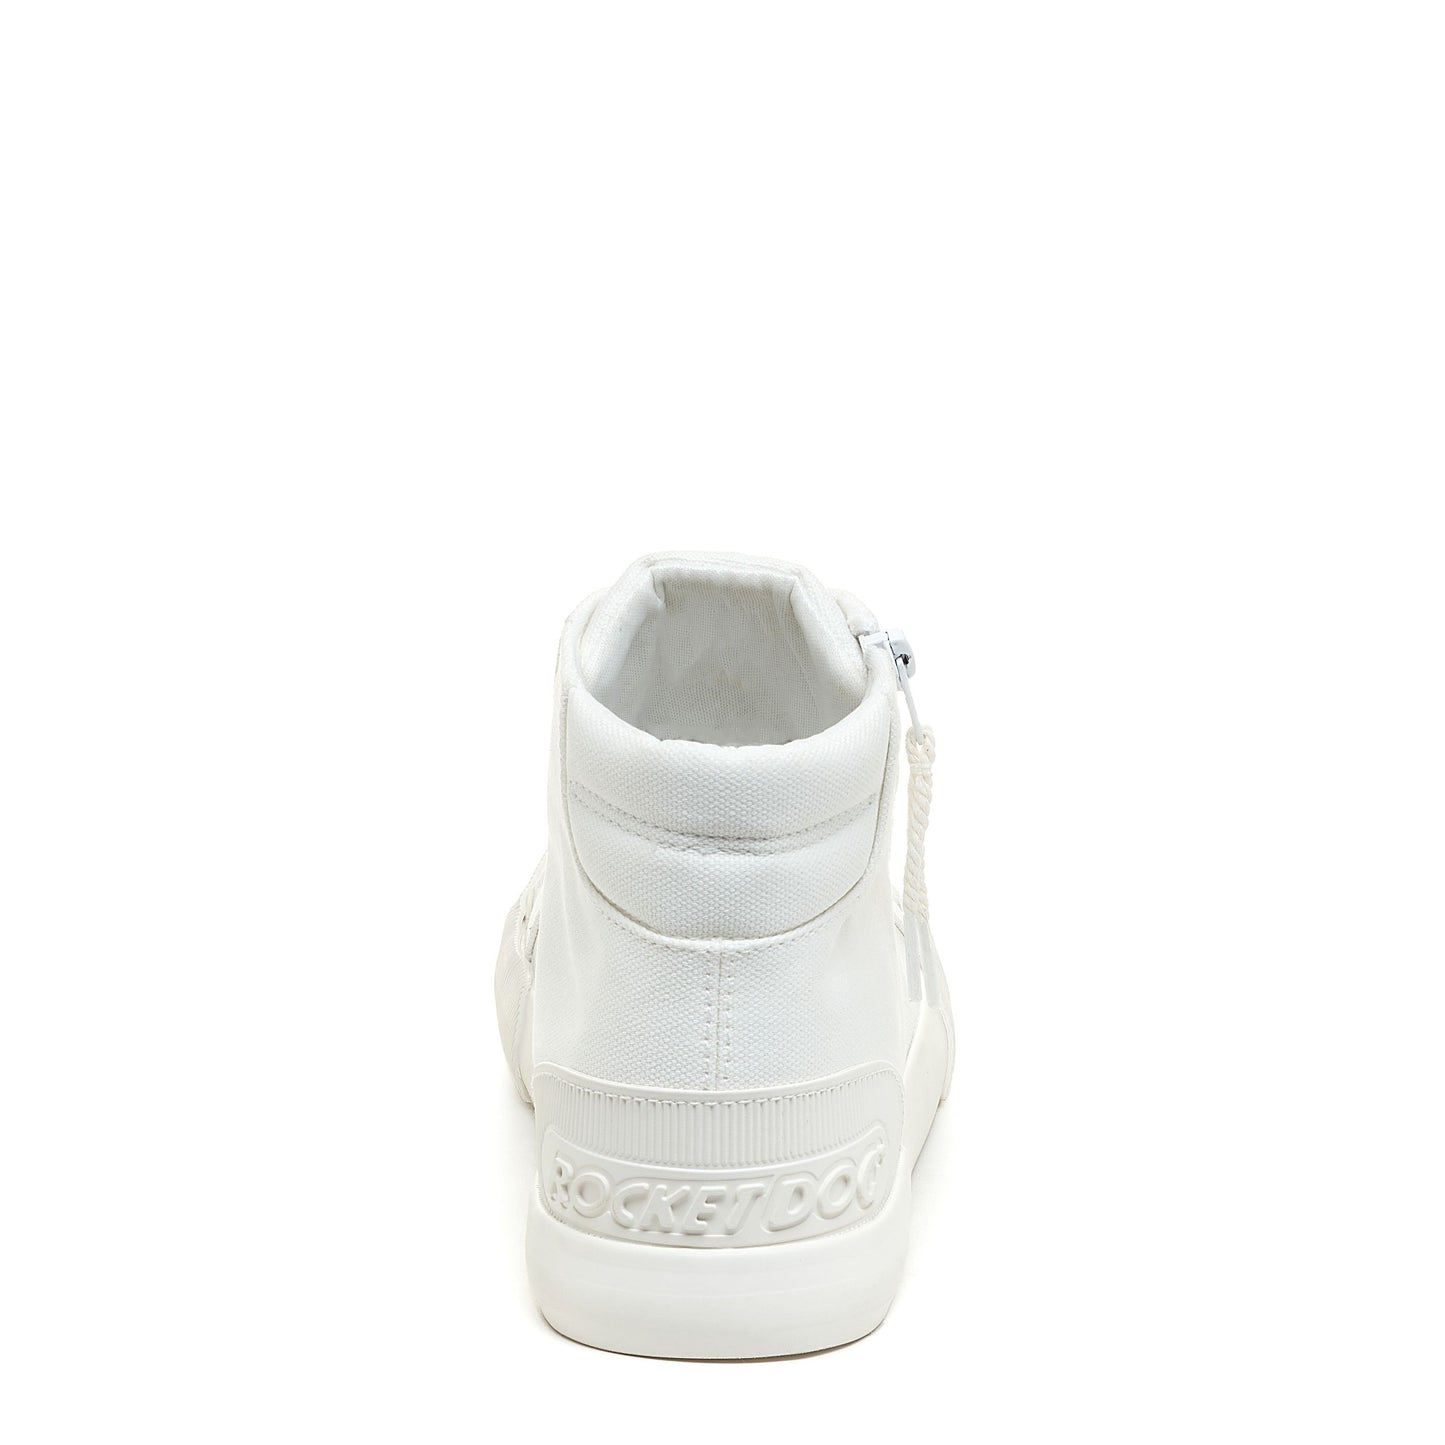 Jazzin All White High Top Trainers